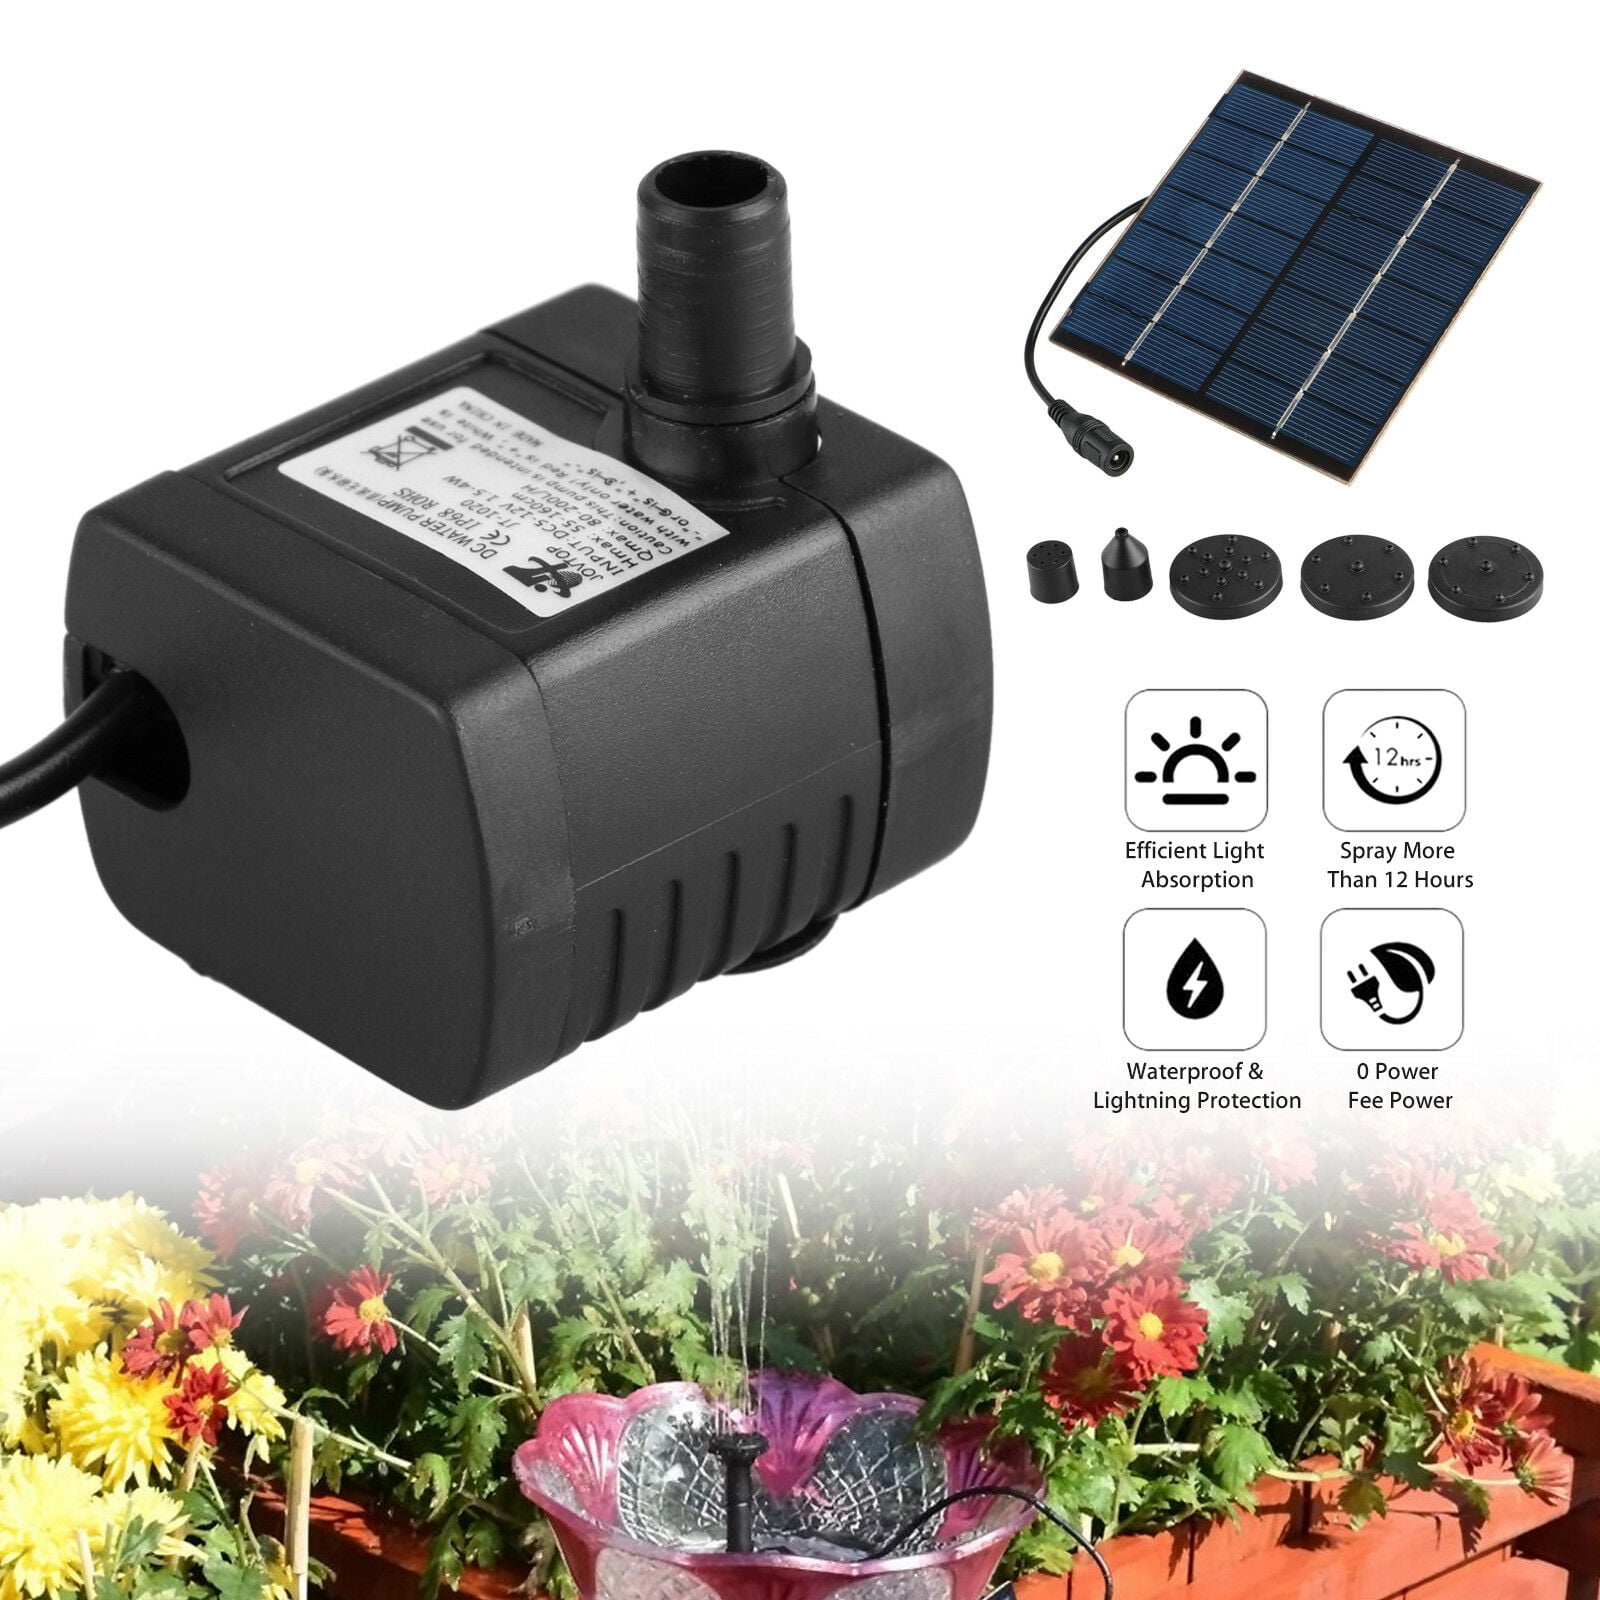 1.2W Solar Fountain Submersible Water Pump for Bird Bath Solar Panel Kit Outdoor Fountain for Small Pond, Patio Garden (Square),4 types of sprinkler heads for different water flows and water heights